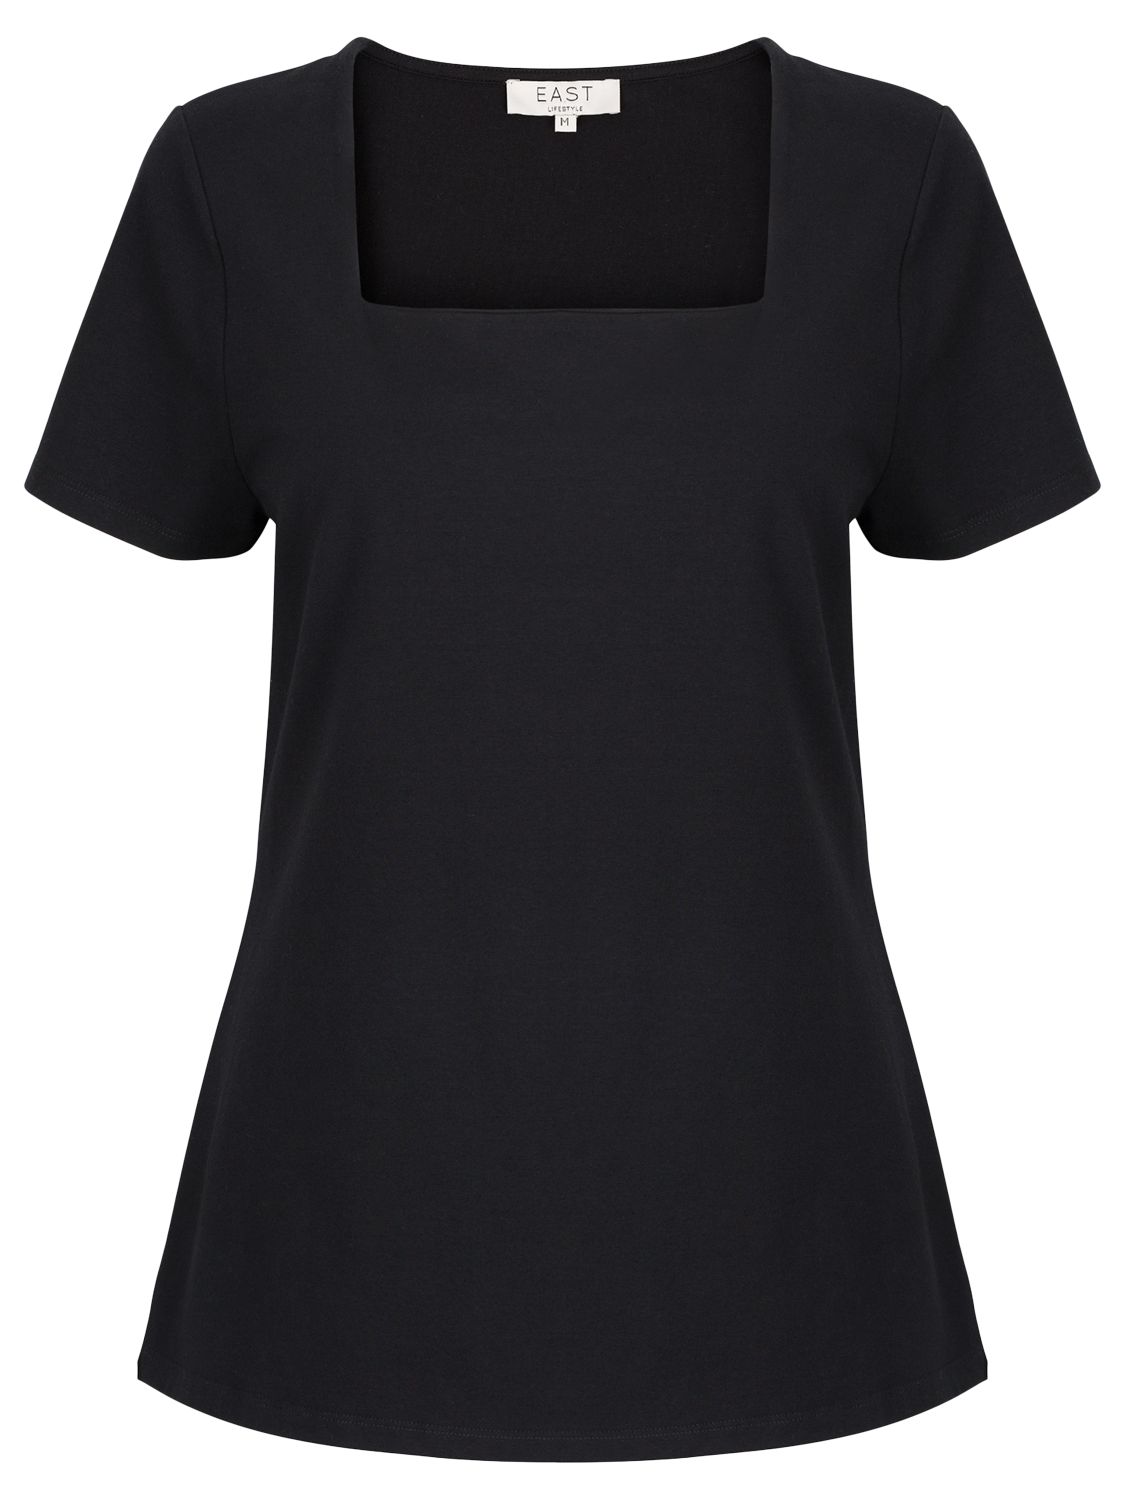 East Square Jersey Top, Black